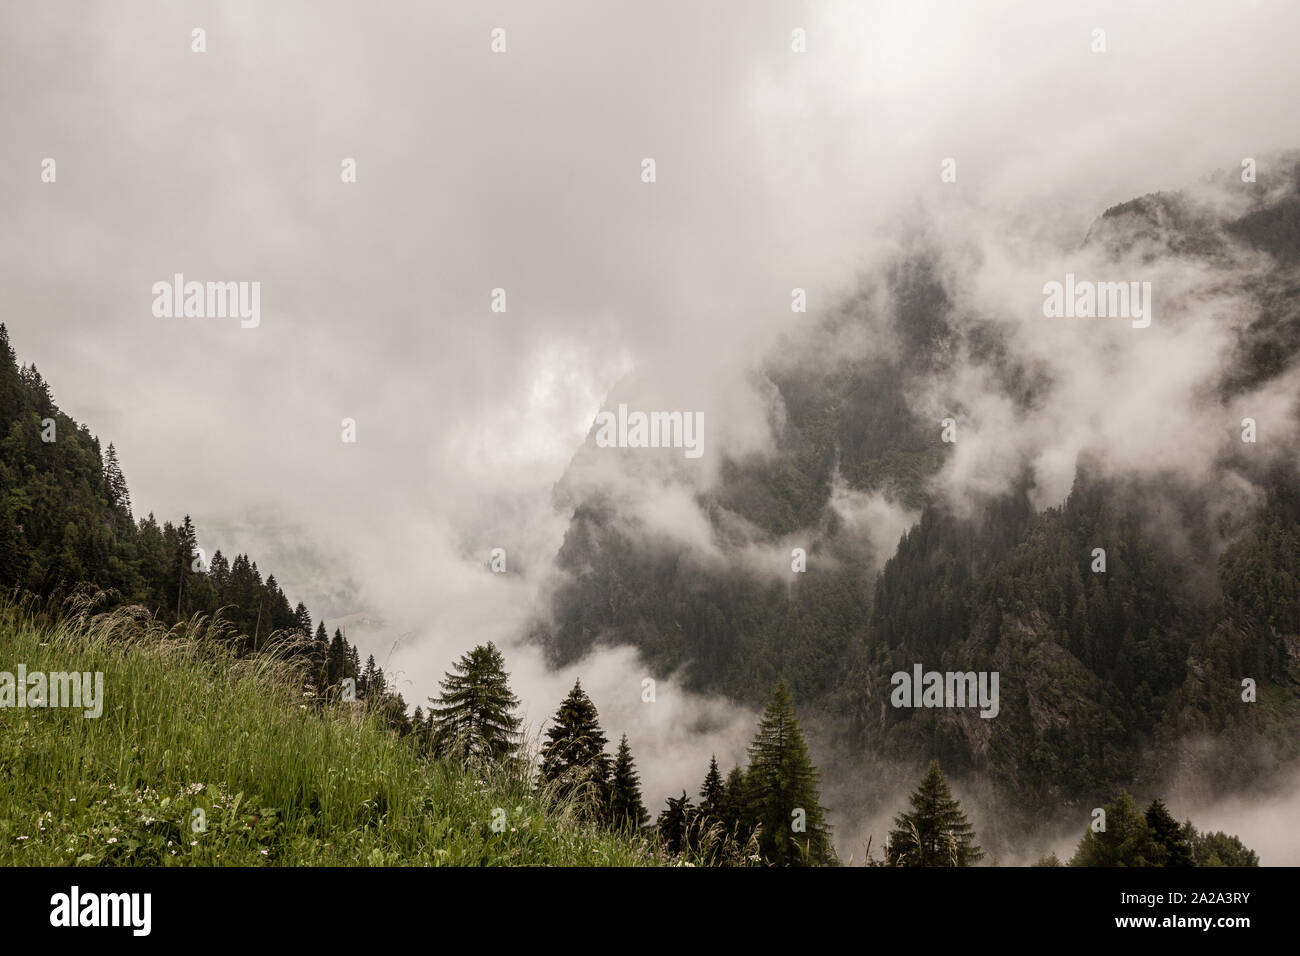 Thick clouds passing over the heavily forested mountainsides of the Alps in Austria Stock Photo